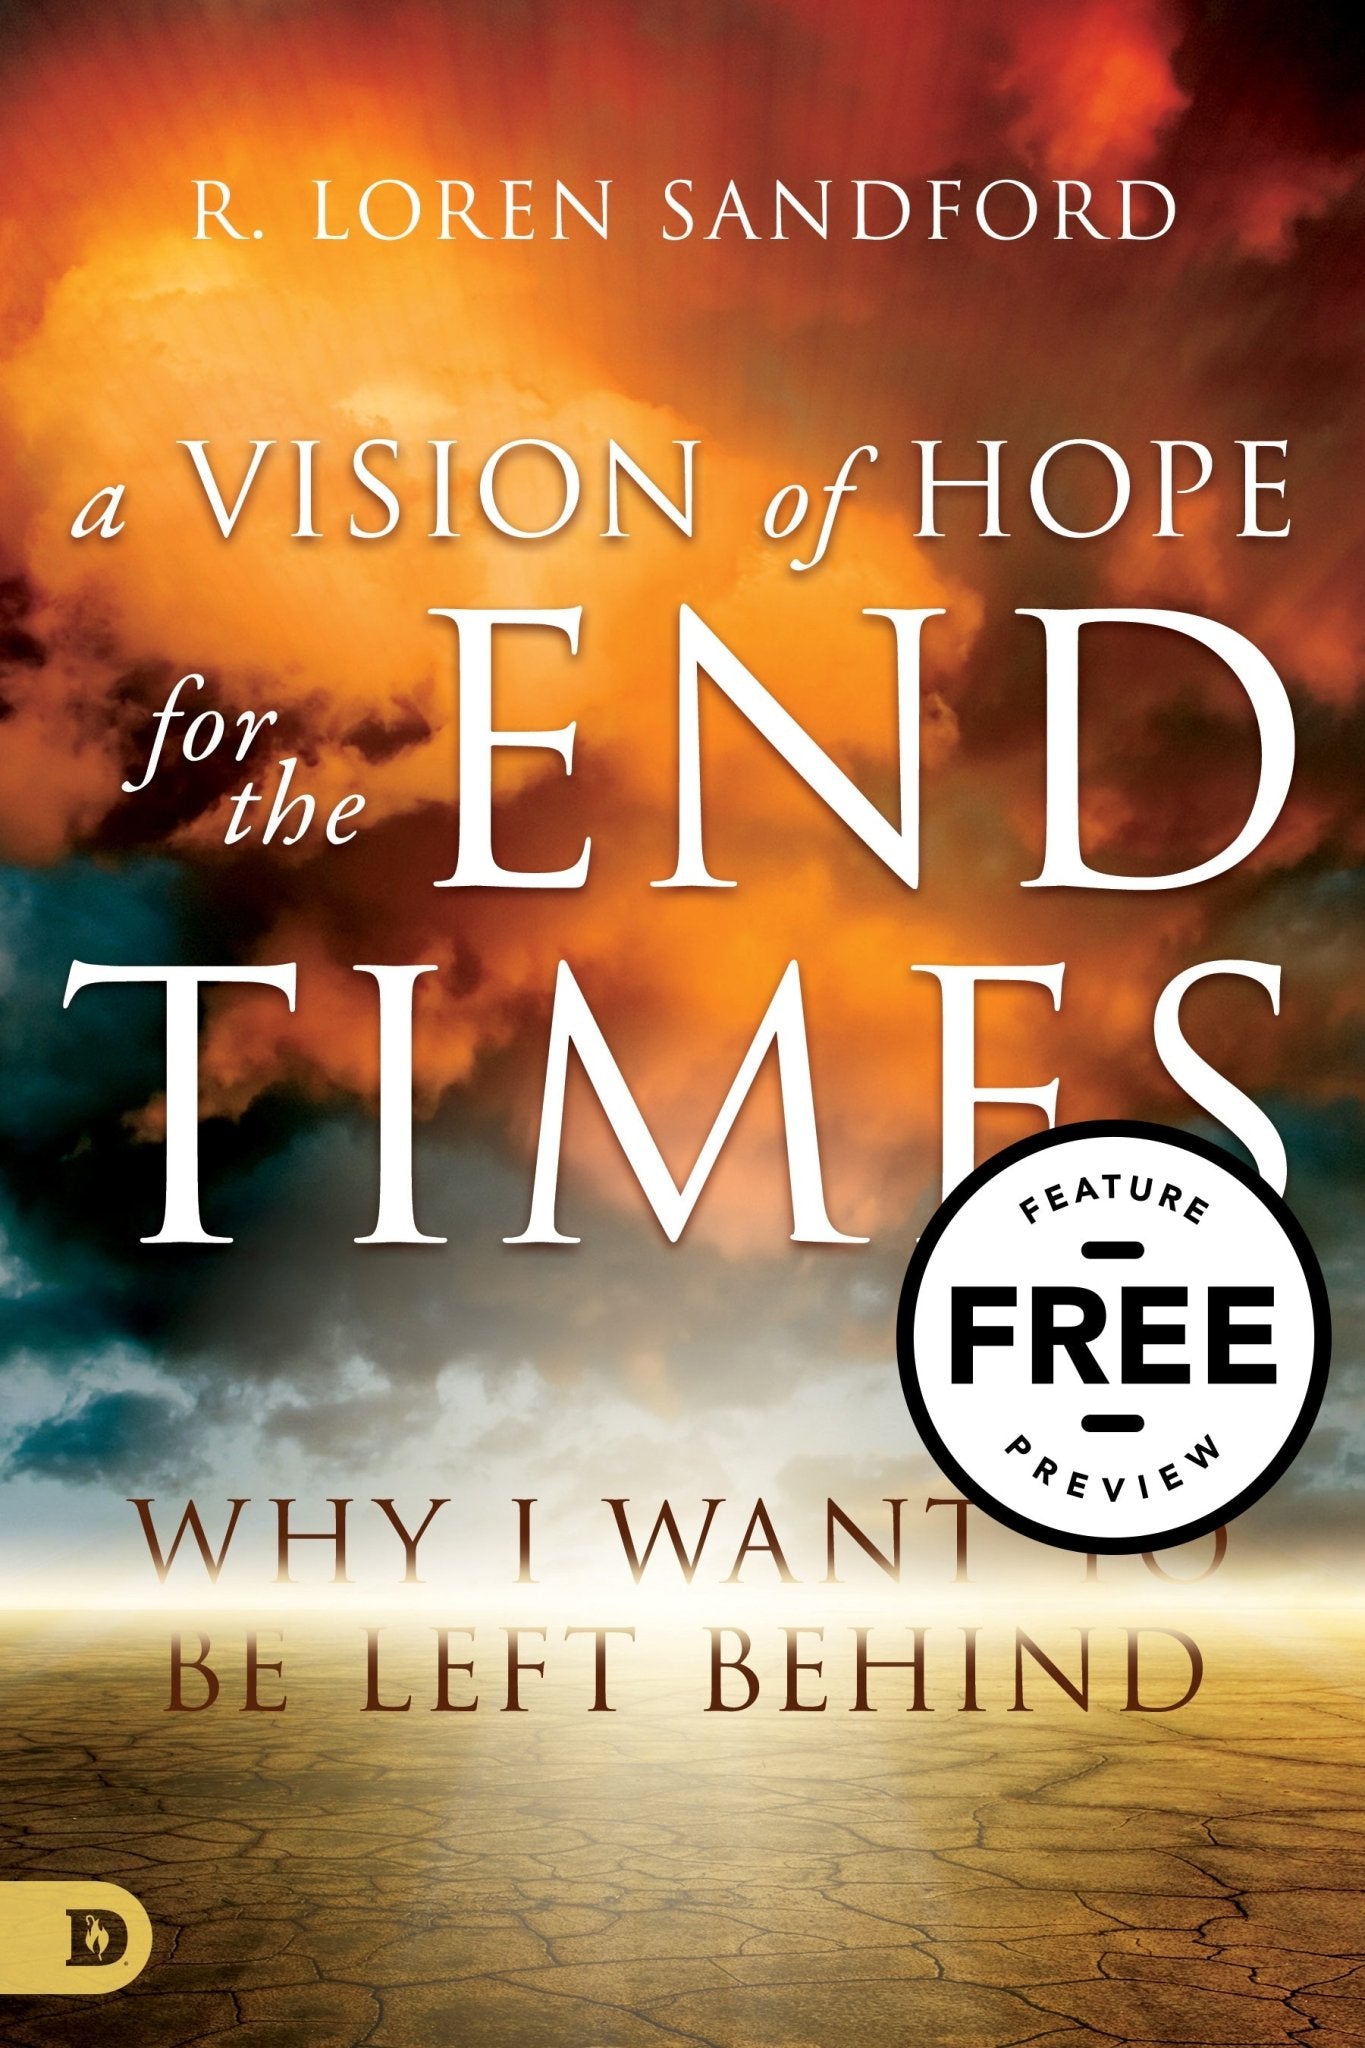 A Vision of Hope for the End Times: Why I Want to Be Left Behind Free Feature Message (PDF Download) - Faith & Flame - Books and Gifts - Destiny Image - DIFIDD